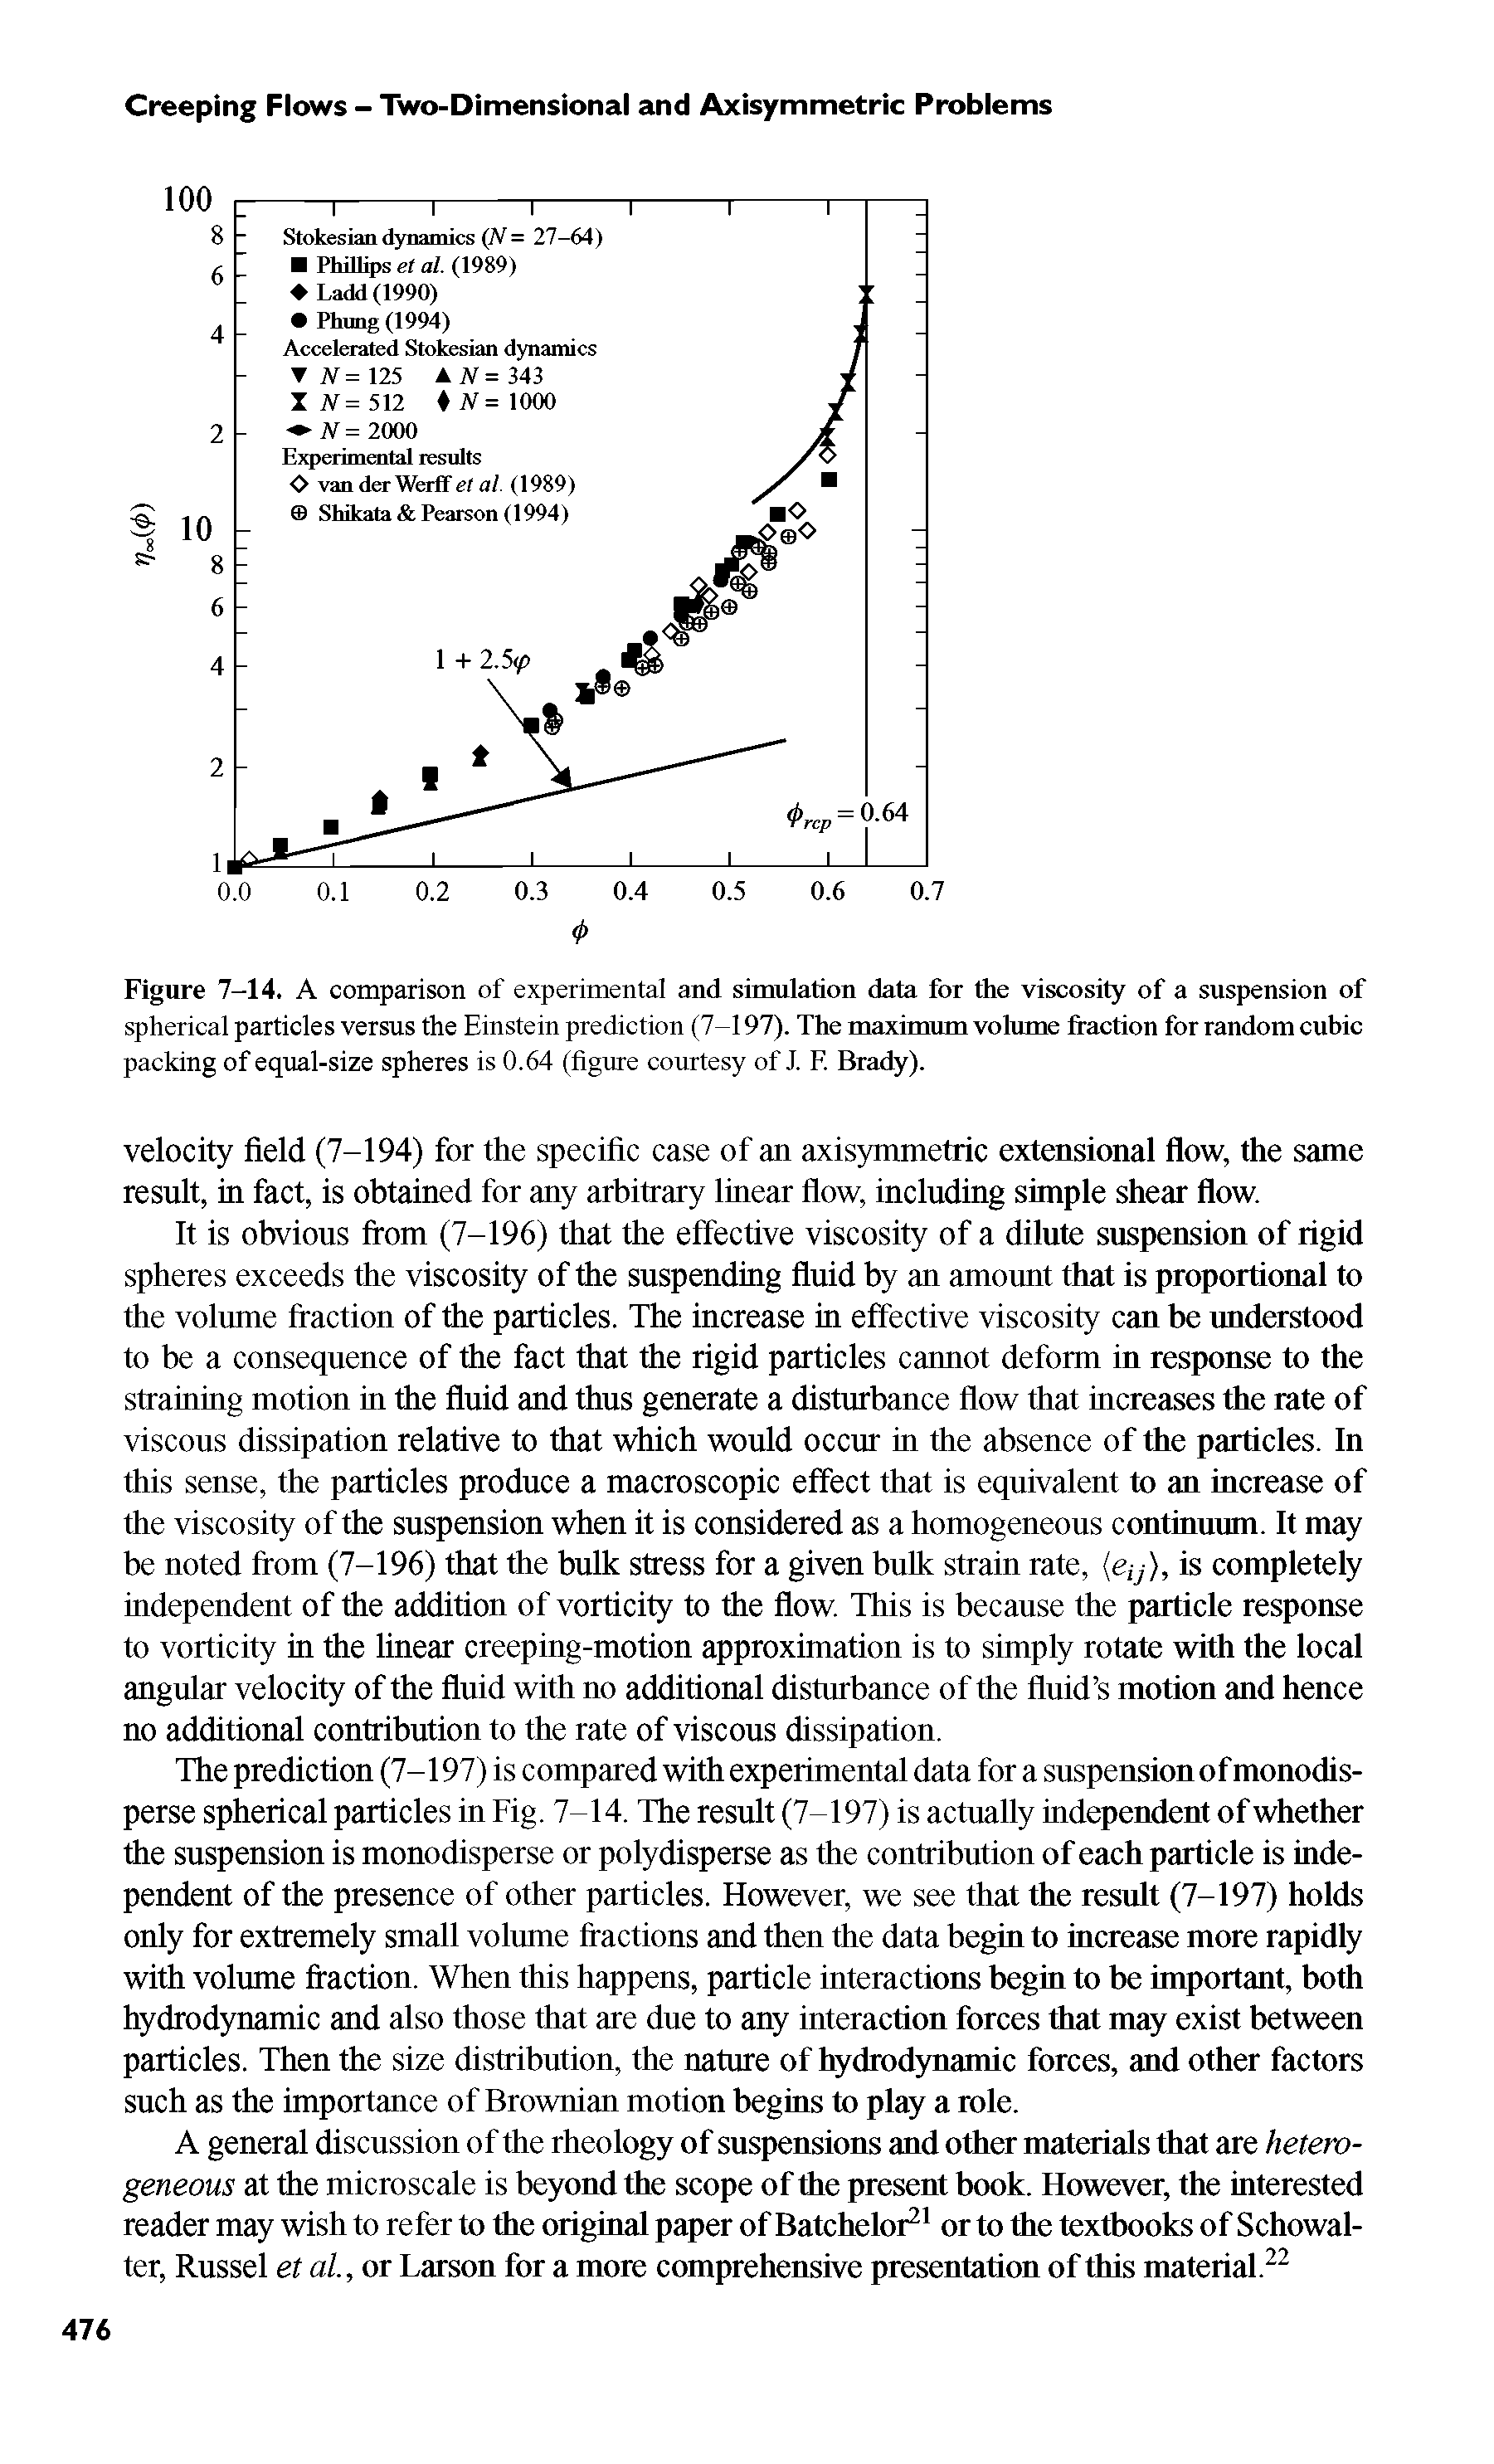 Figure 7-14. A comparison of experimental and simulation data for the viscosity of a suspension of spherical particles versus the Einstein prediction (7-197). The maximum volume fraction for random cubic packing of equal-size spheres is 0.64 (figure courtesy of J. E Brady).